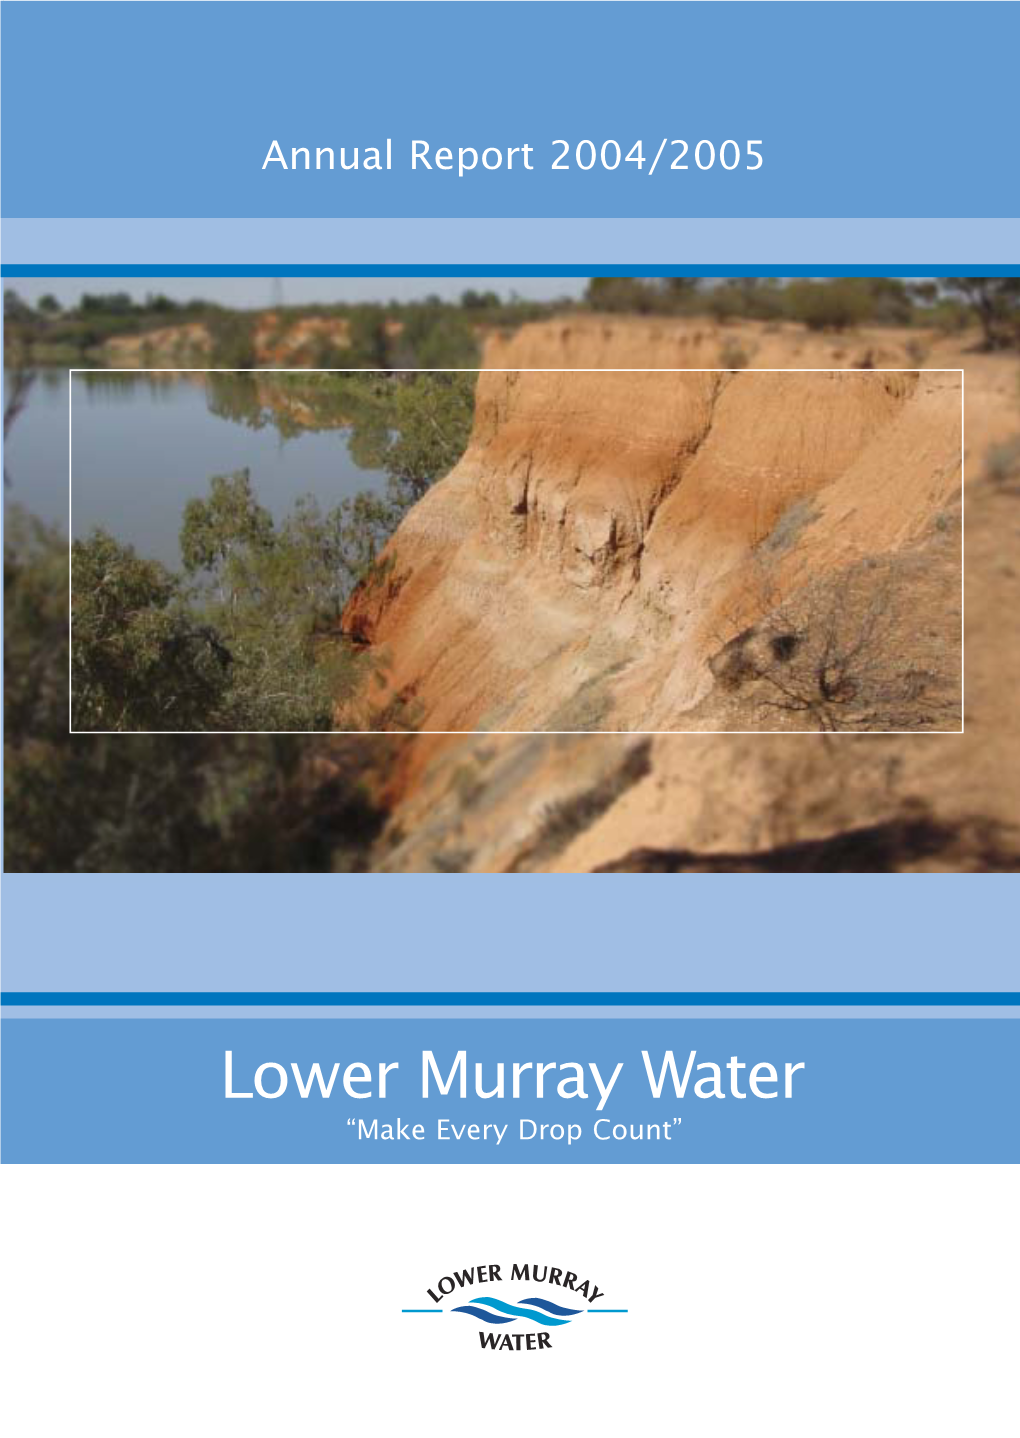 Lower Murray Water Annual Report 2004/05